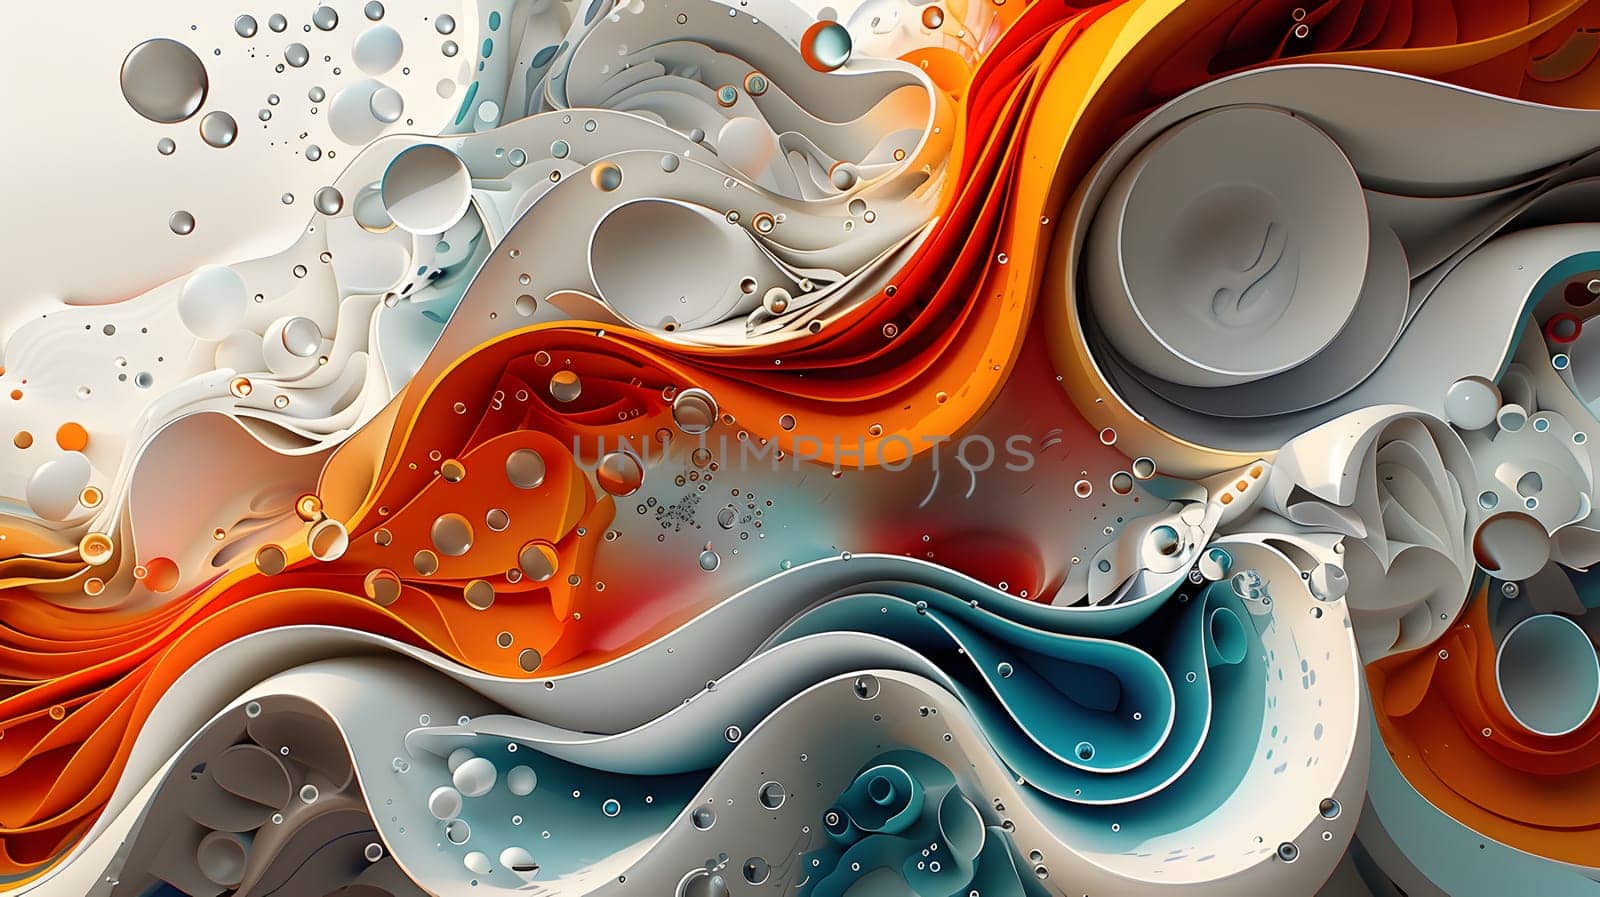 Vibrant swirl of electric blue liquid resembles a natural organism in fluid art by Nadtochiy